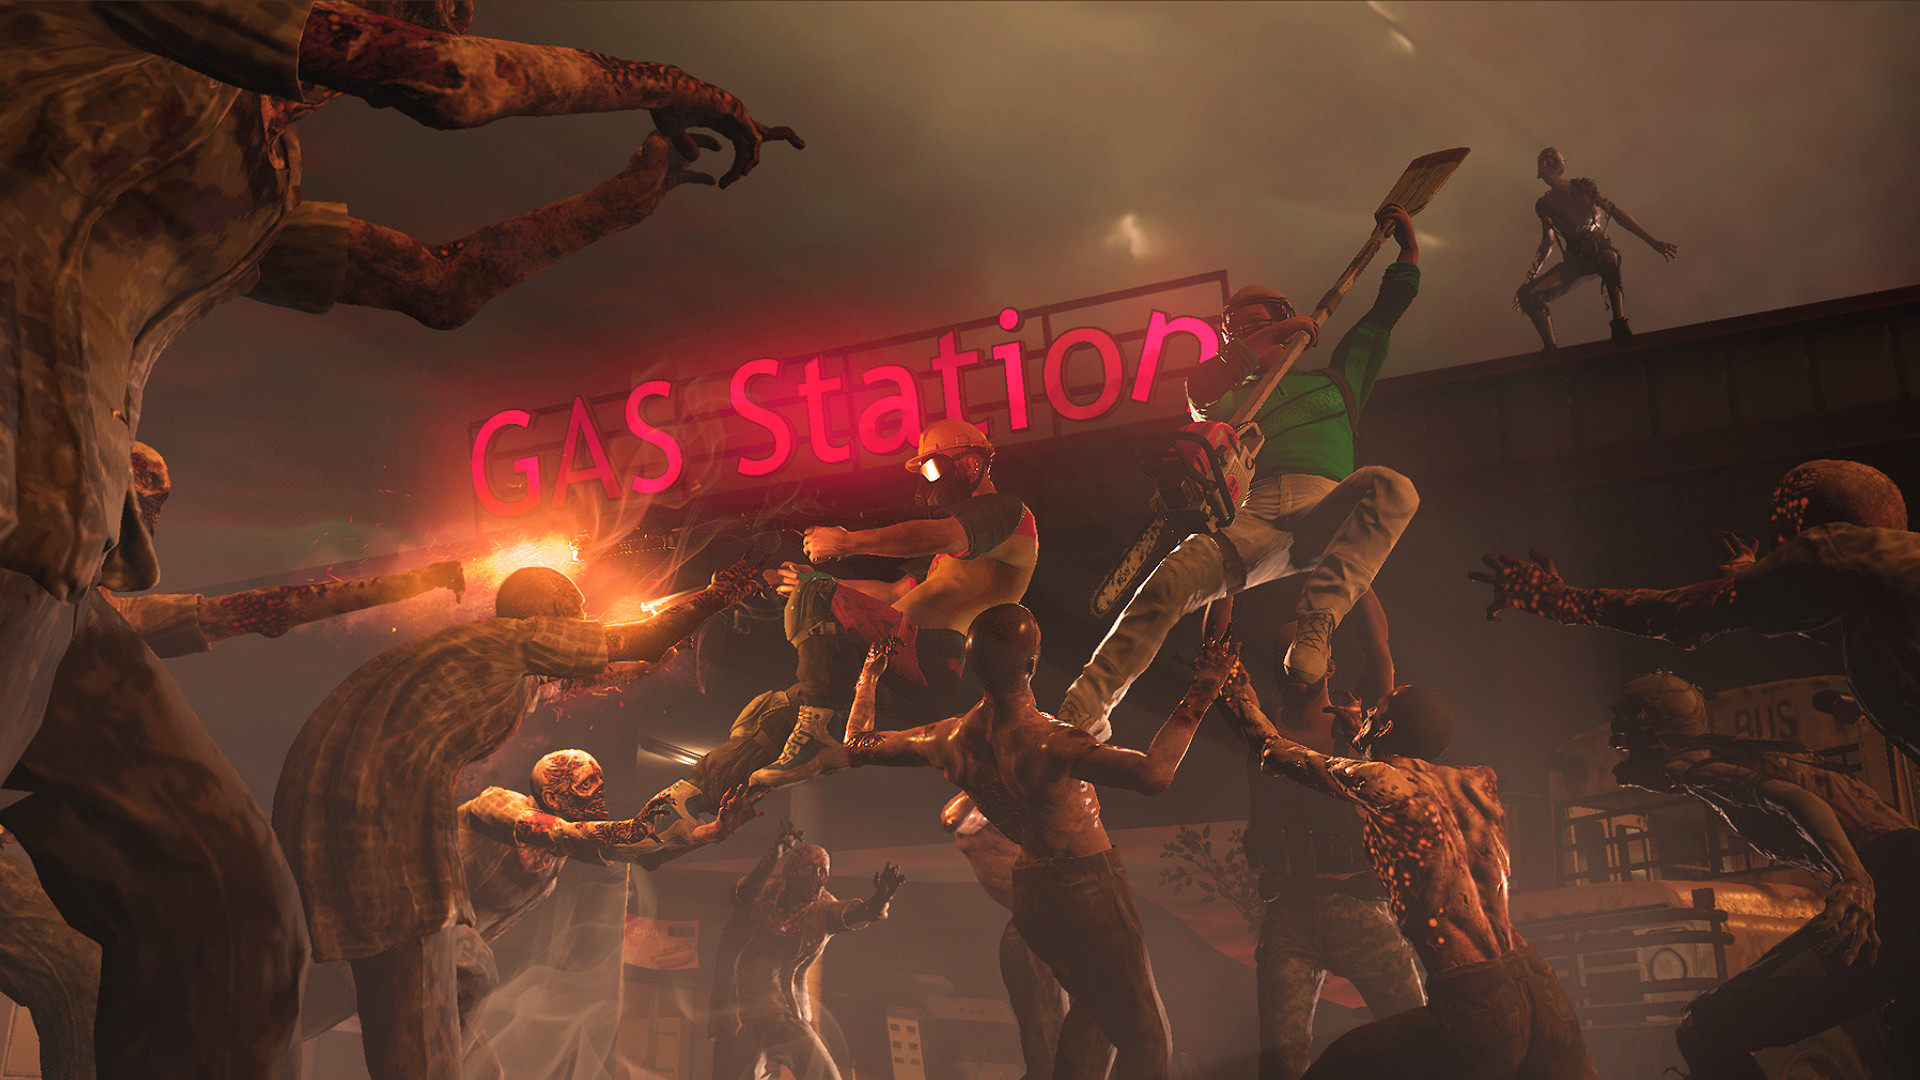 image shows a horde of zombies being fought by player controlled characters.